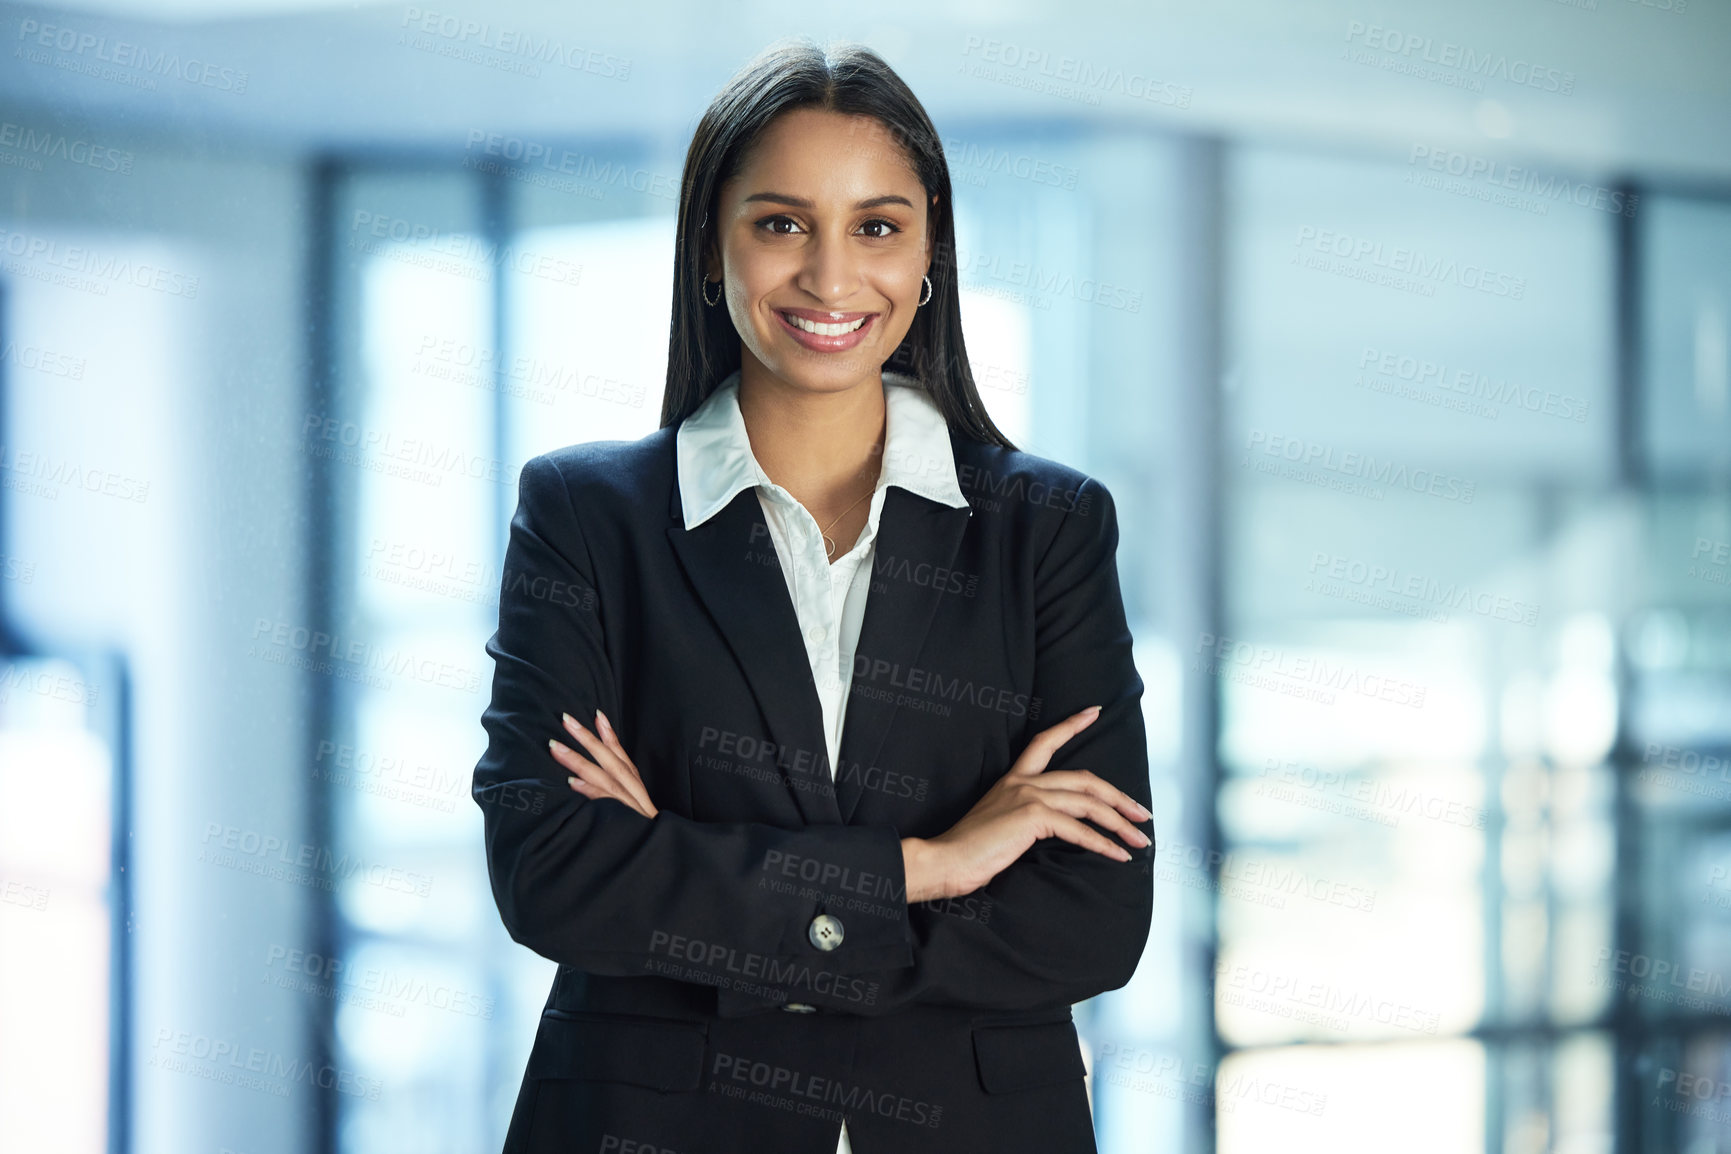 Buy stock photo Shot of a young businesswoman in her office